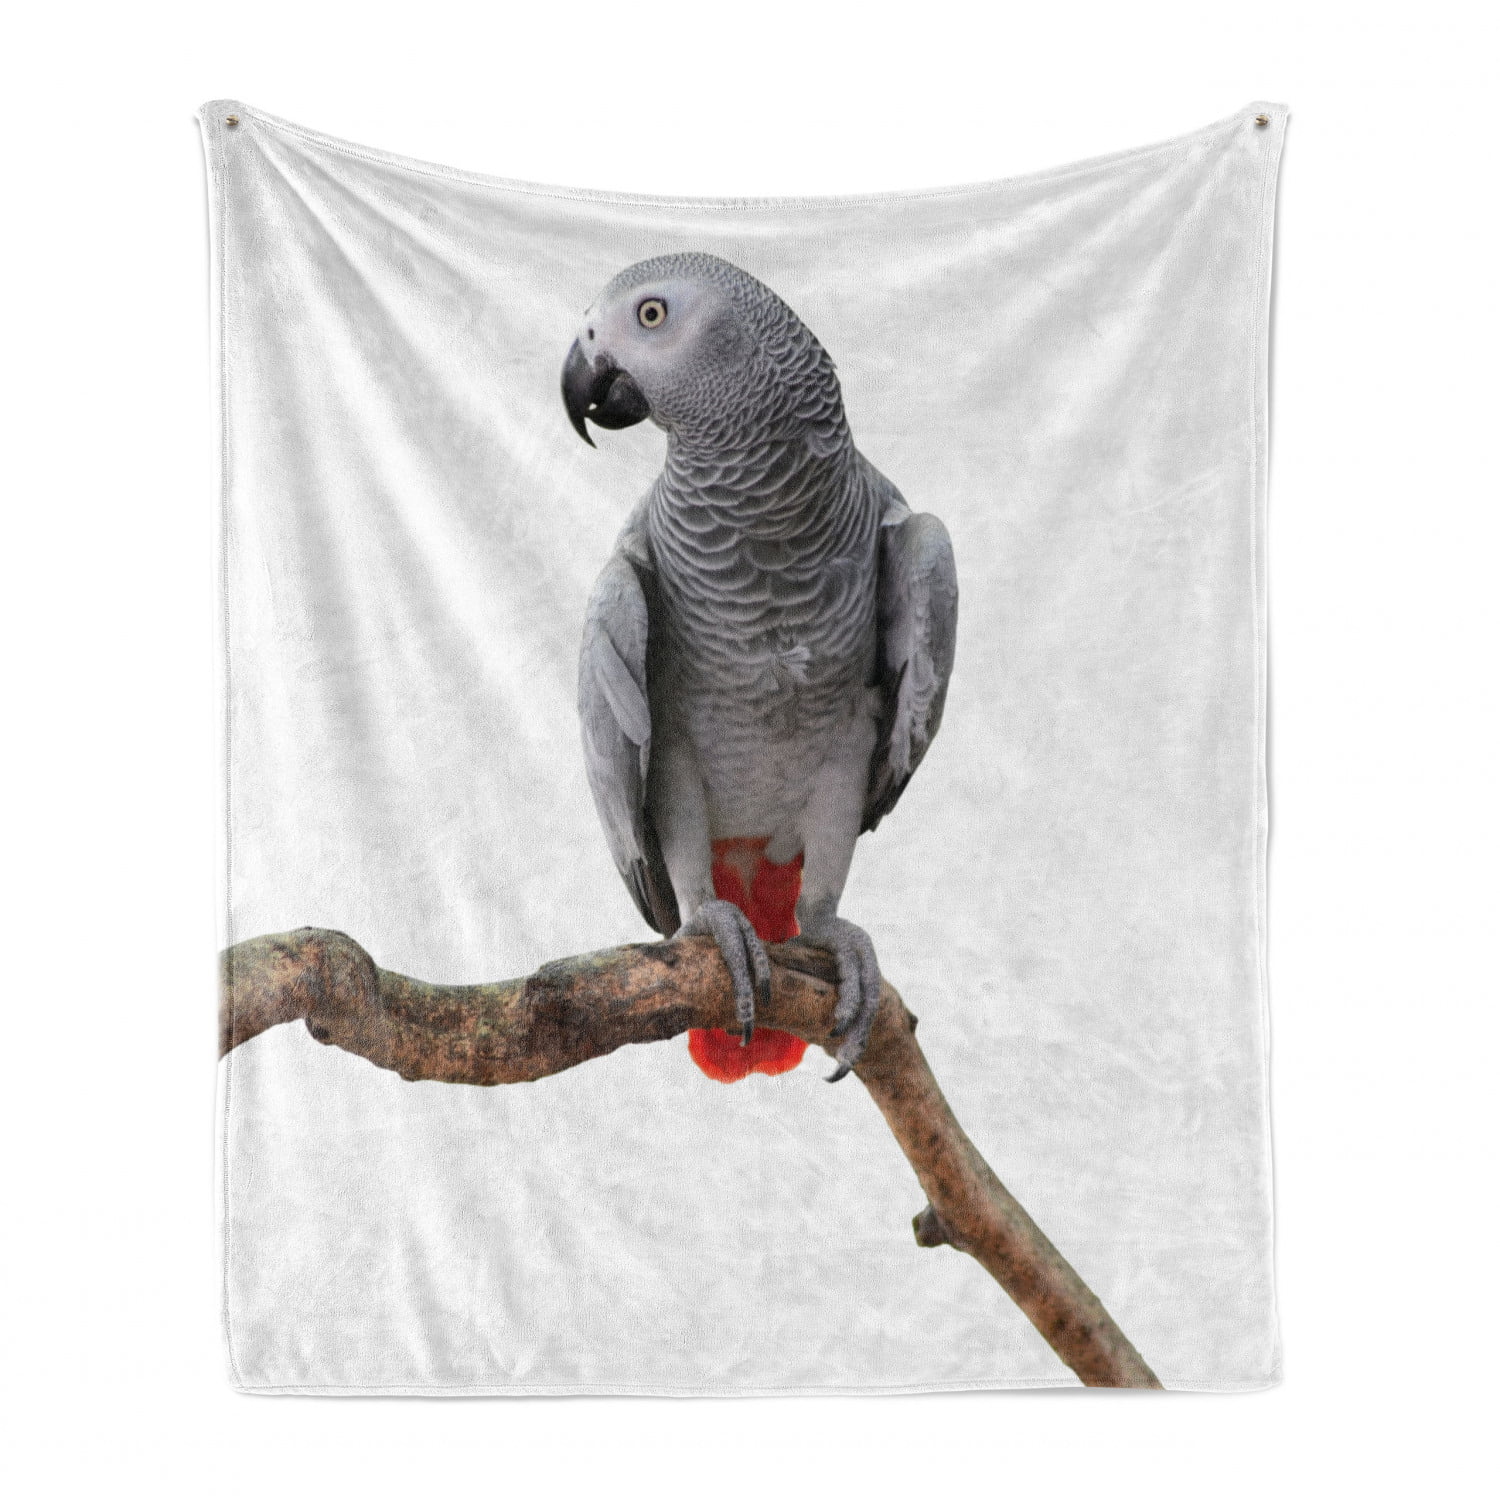 Fleece Throw Blanket Tree and Parrot Bird Soft Blankets and Throws for Sofa Bed Machine Washable 60x50 Inches